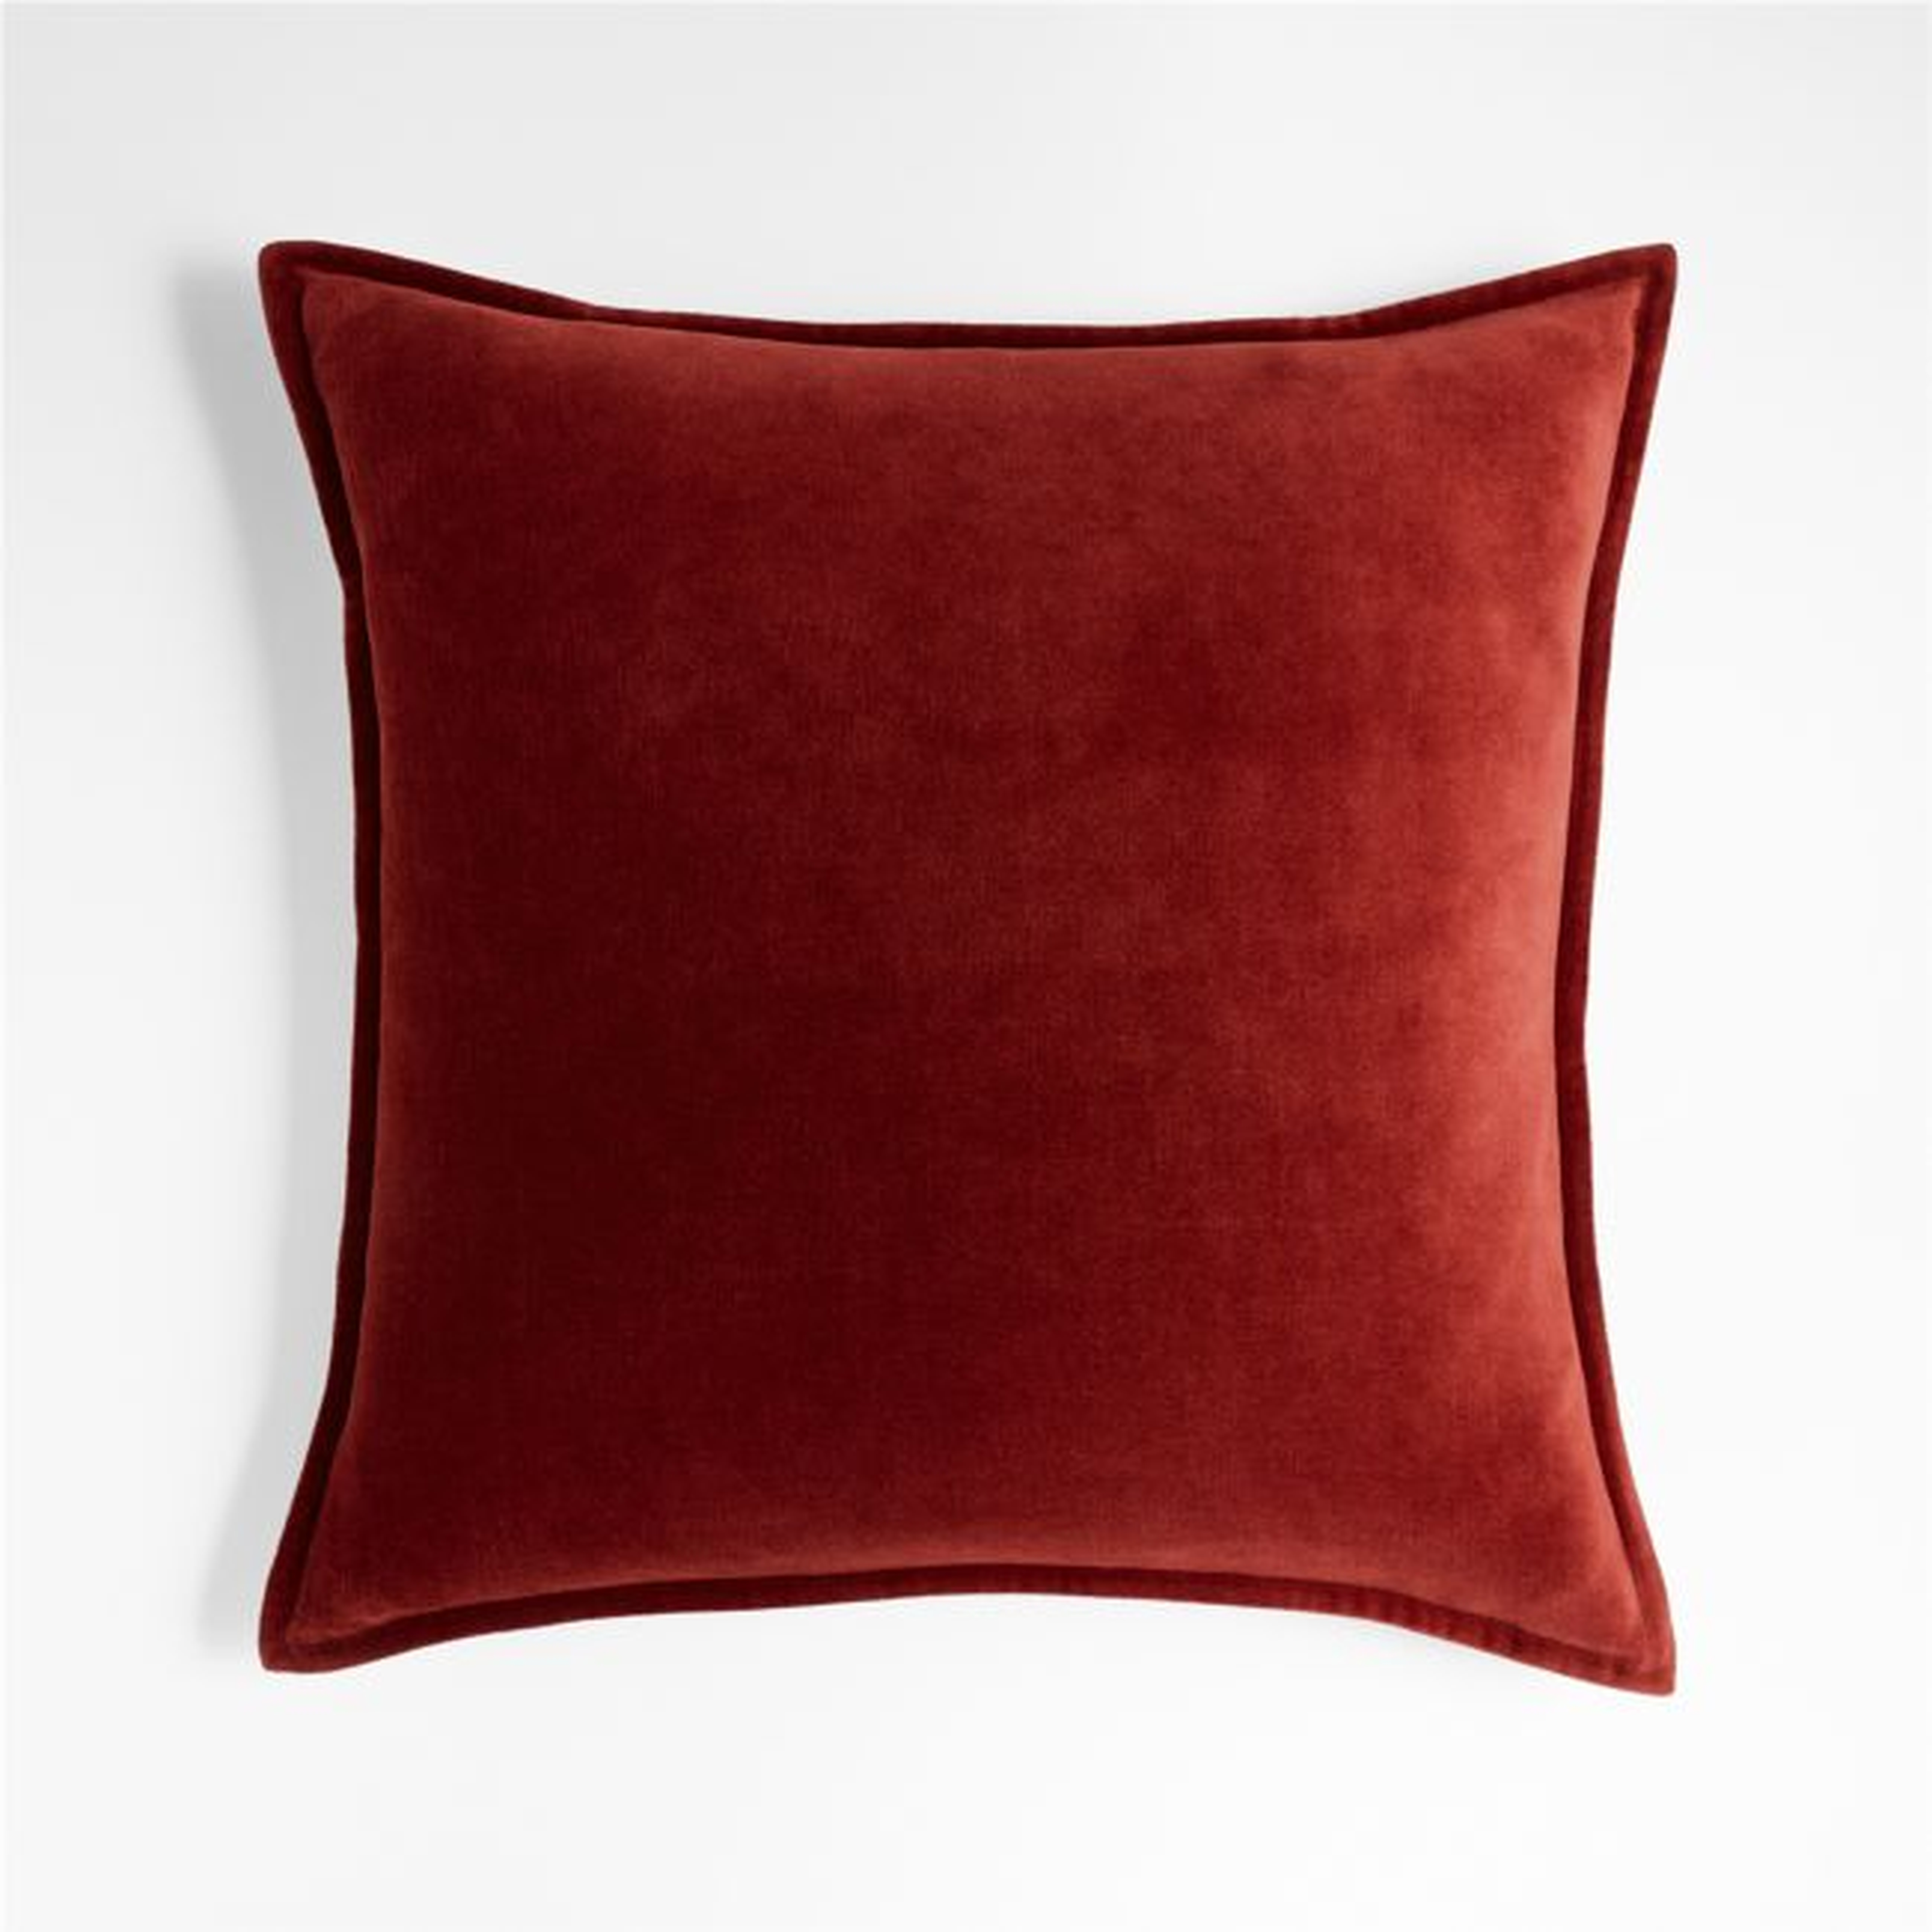 Brick 20" Washed Cotton Velvet Pillow Cover - Crate and Barrel